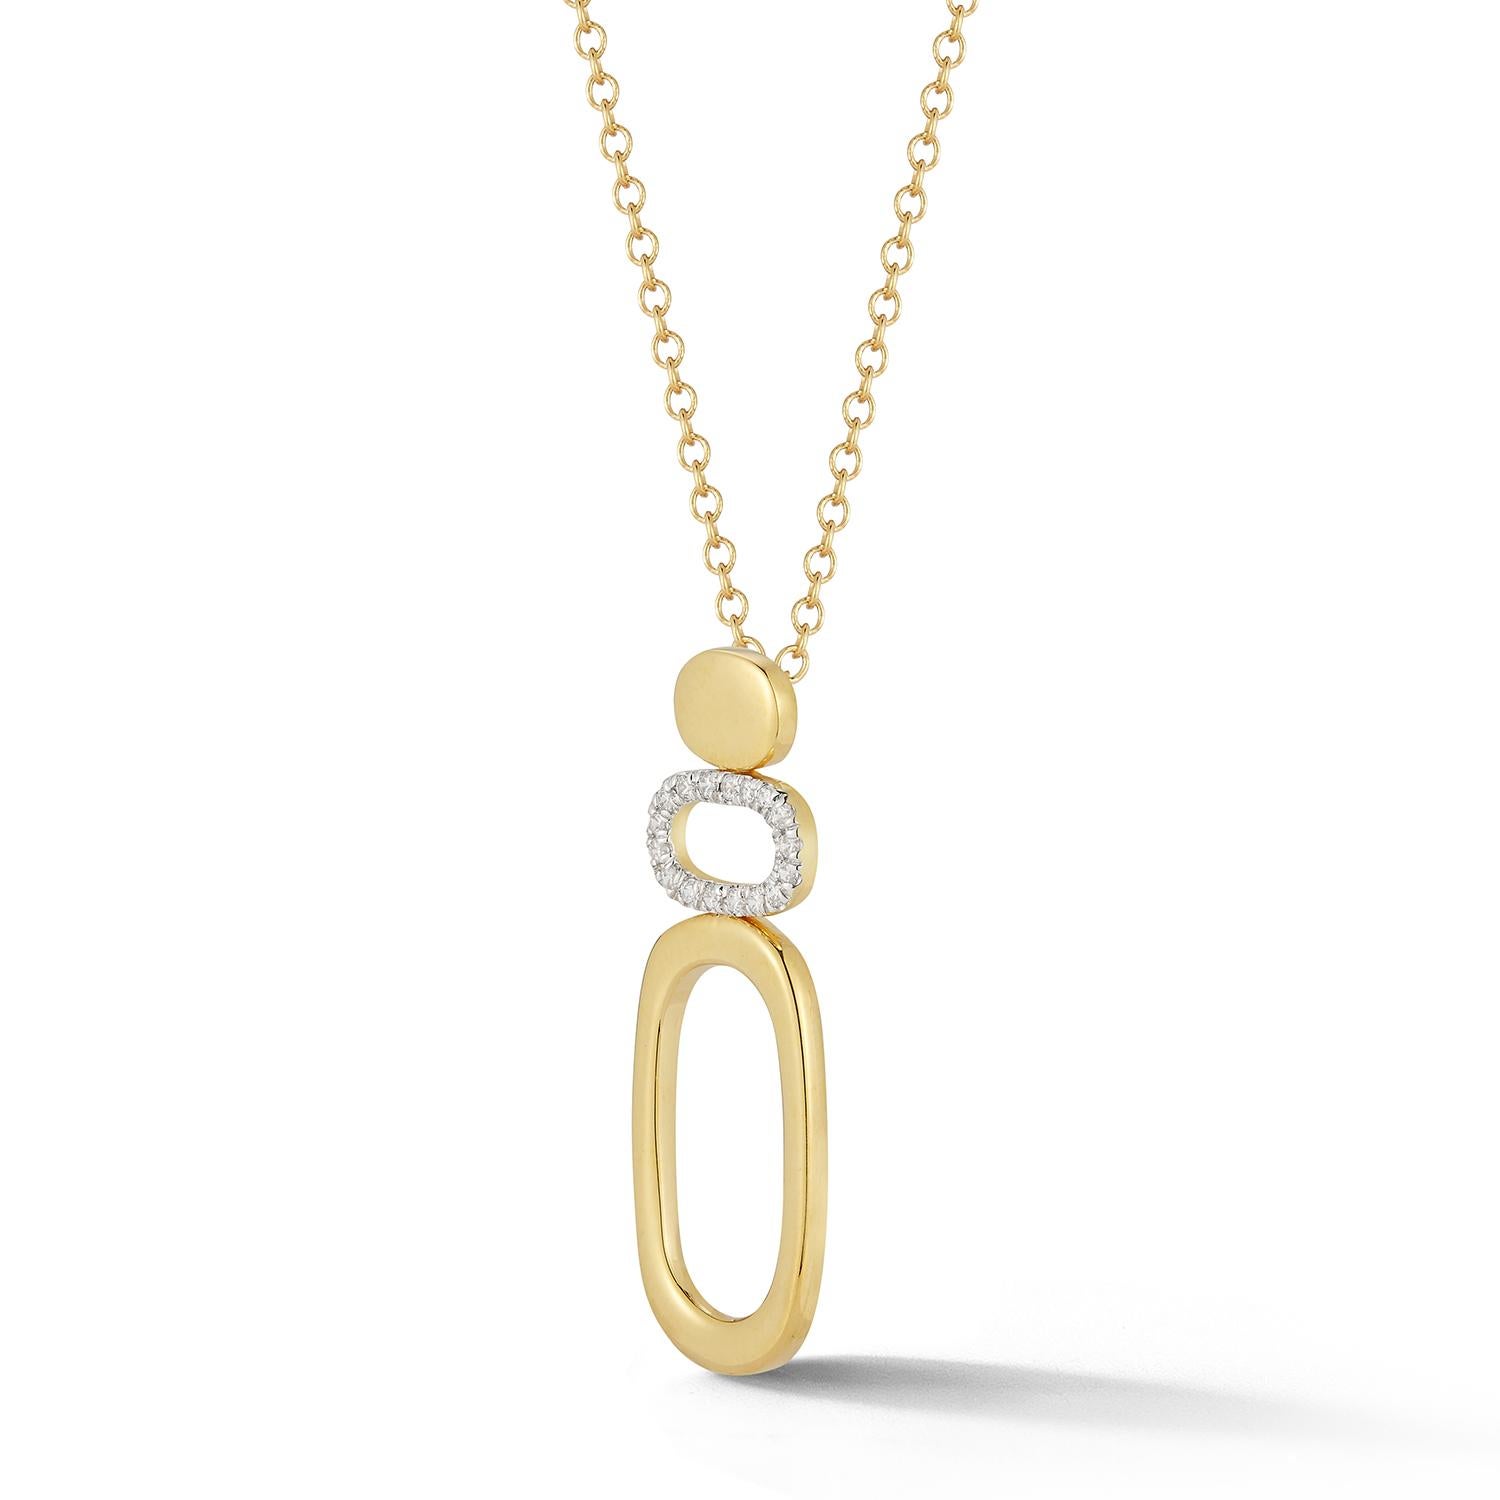 14 Karat Yellow Gold Hand-Crafted High Polish-Finished Geometric Pendant, Accented with 0.17 Carats of a Pave Set Open Diamond Ellipse, Sliding on a 16